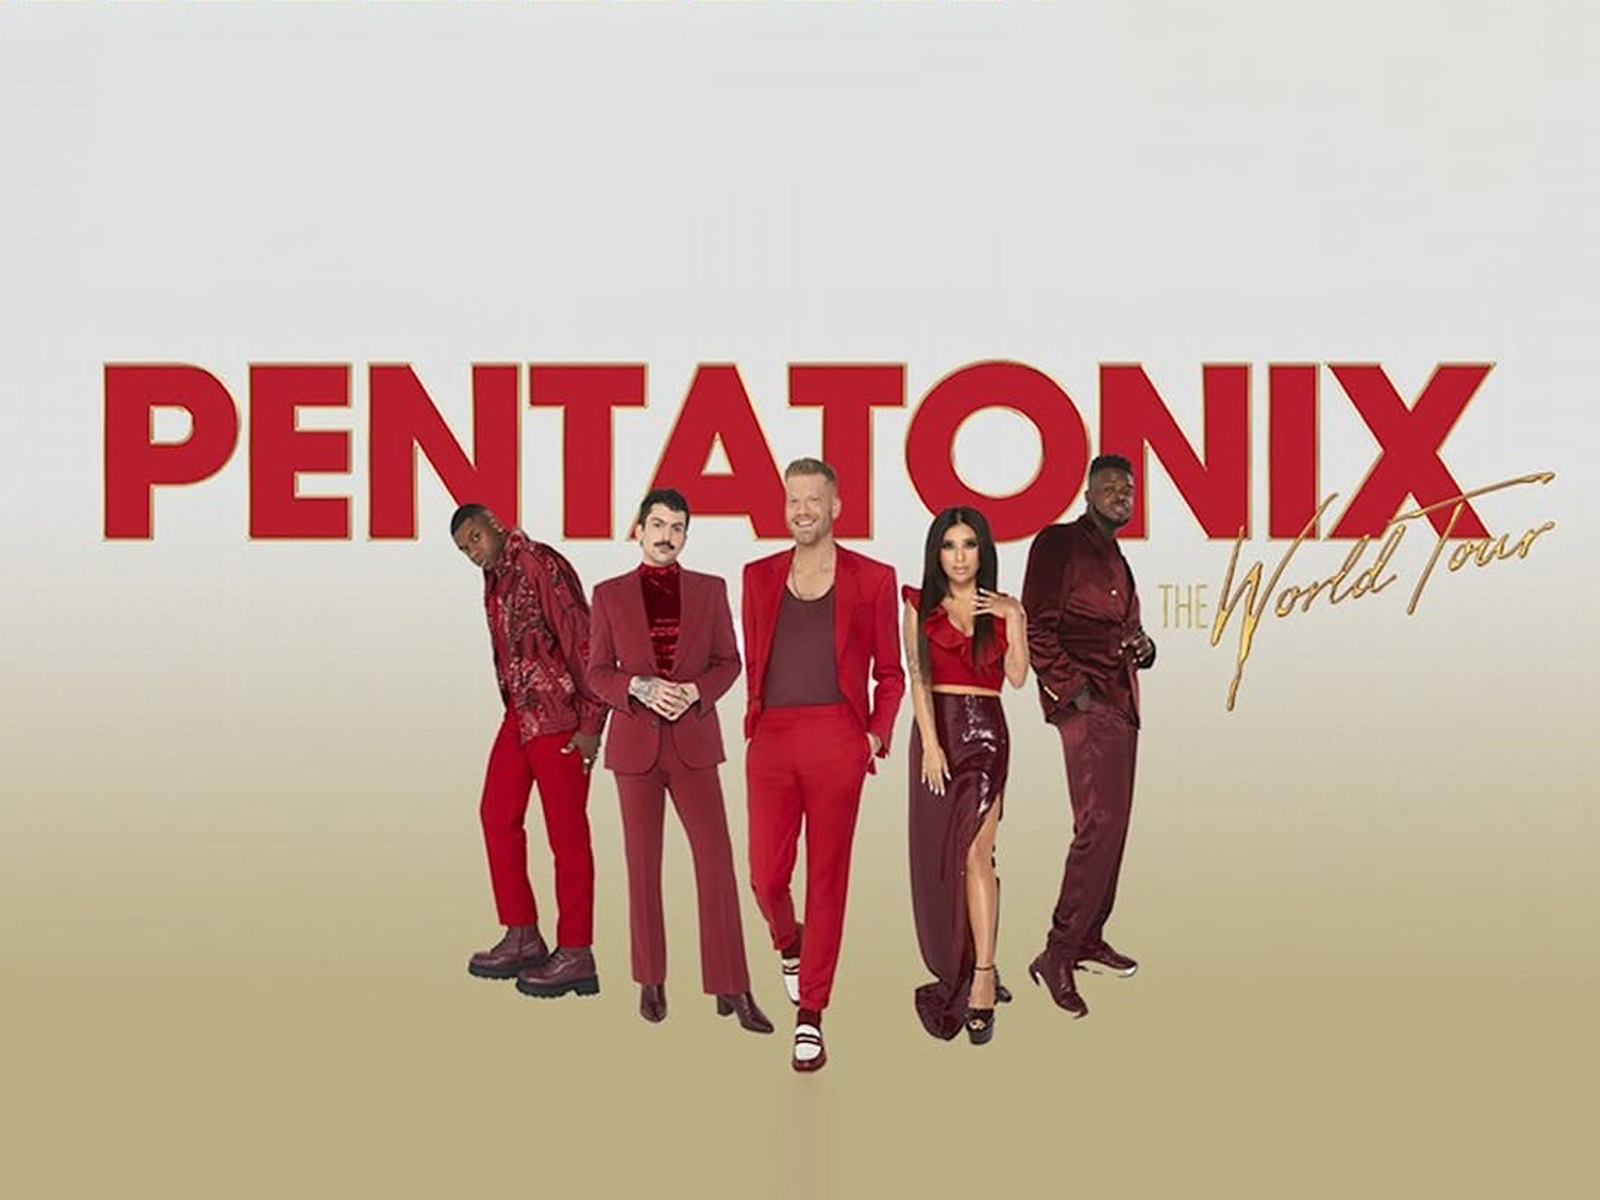 Pentatonix "The World Tour" with Special Guest Lauren Alaina Tickets